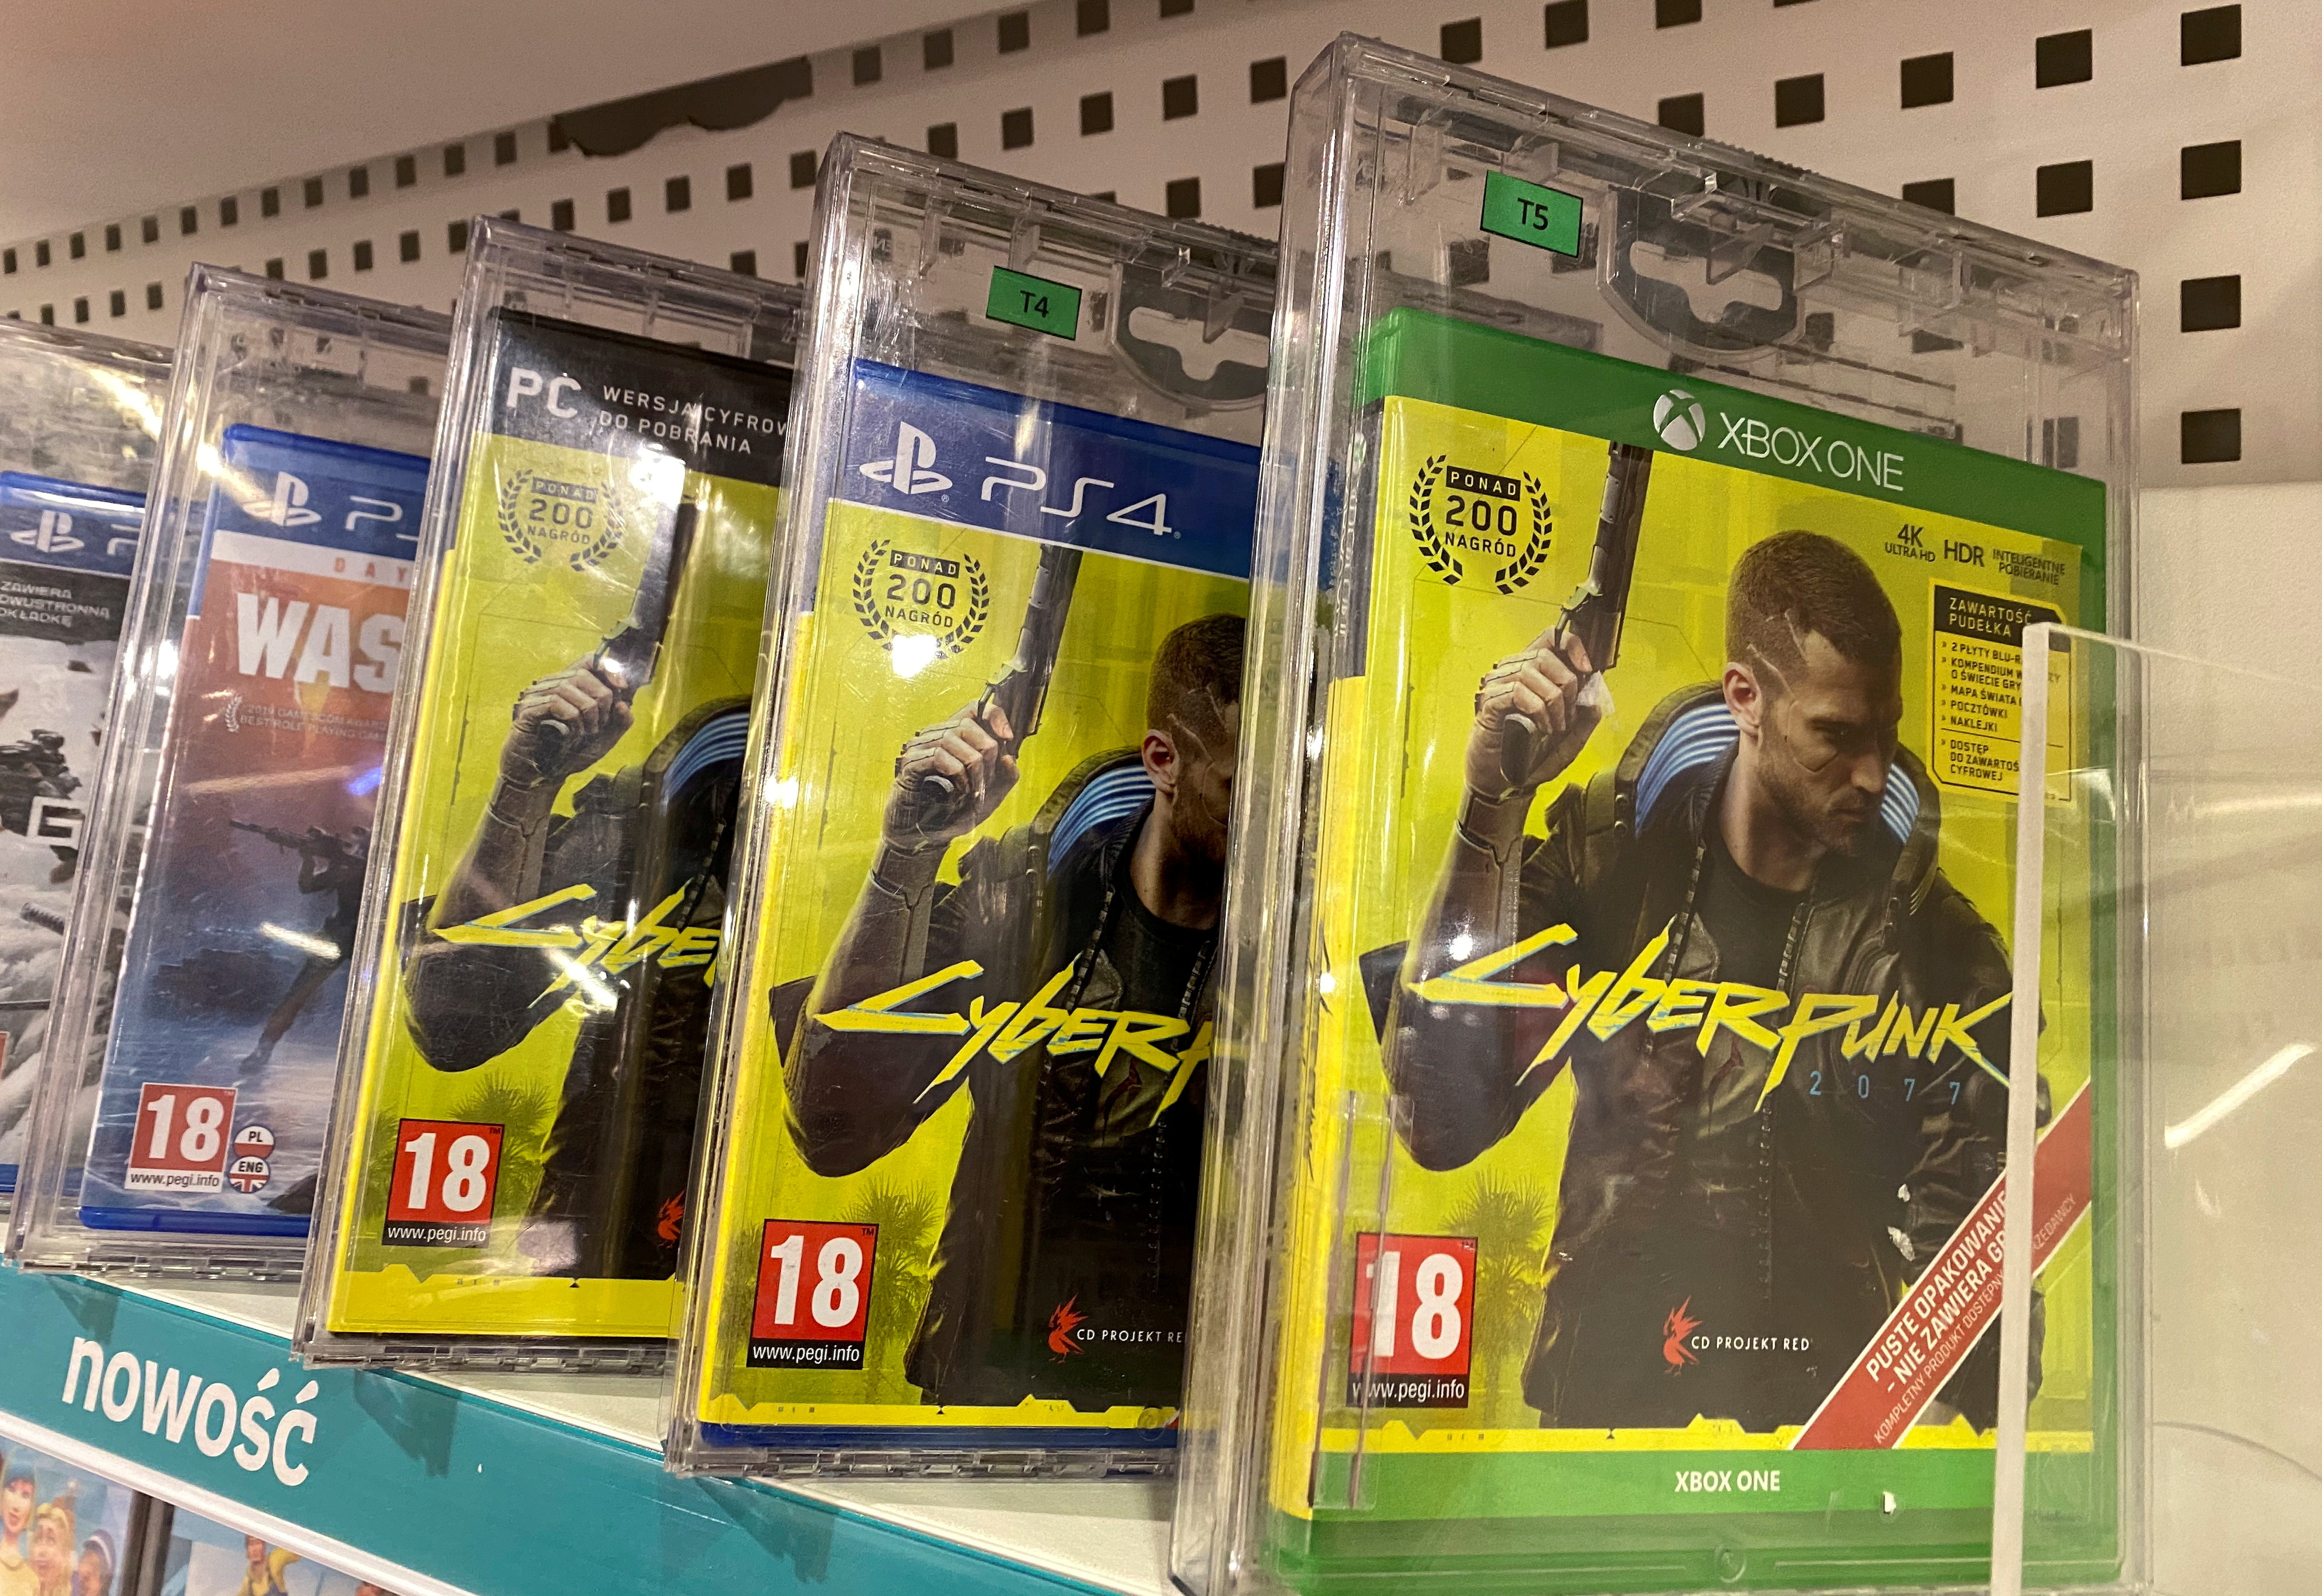 Boxes with CD Projekt's game Cyberpunk 2077 are displayed in Warsaw